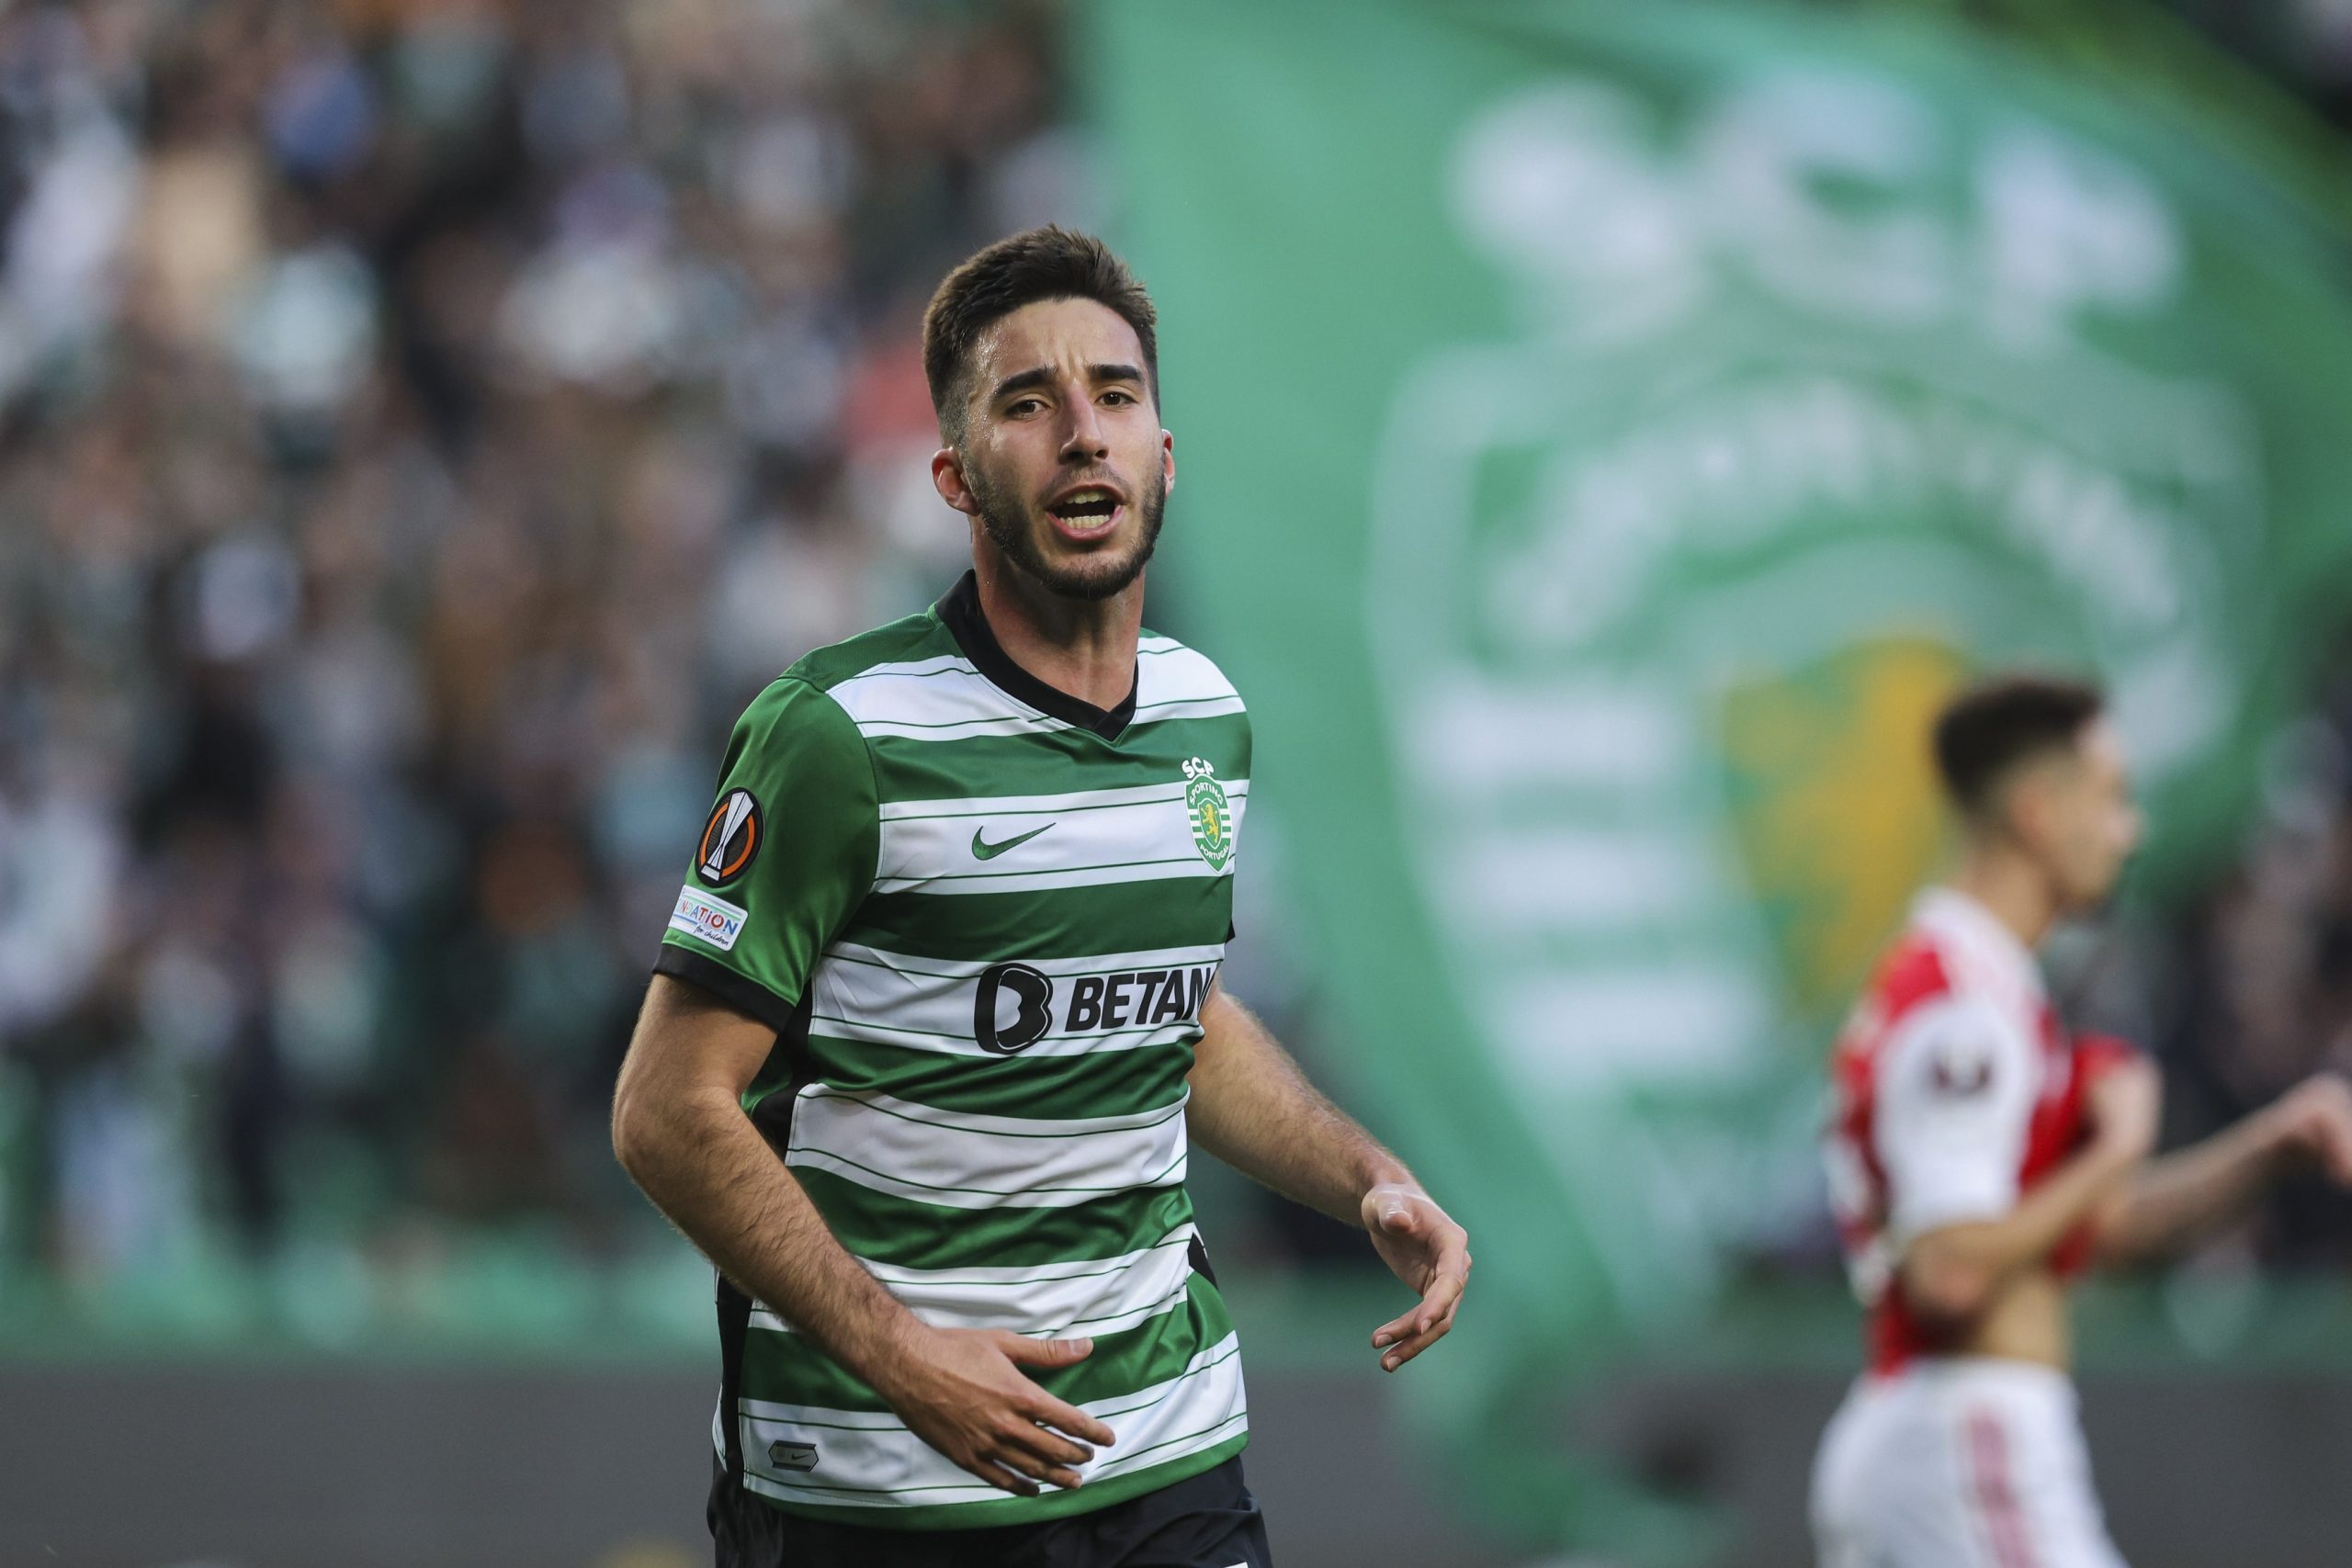 Goncalo Inacio of Sporting CP is wanted by Chelsea. (Photo by Carlos Rodrigues/Getty Images)